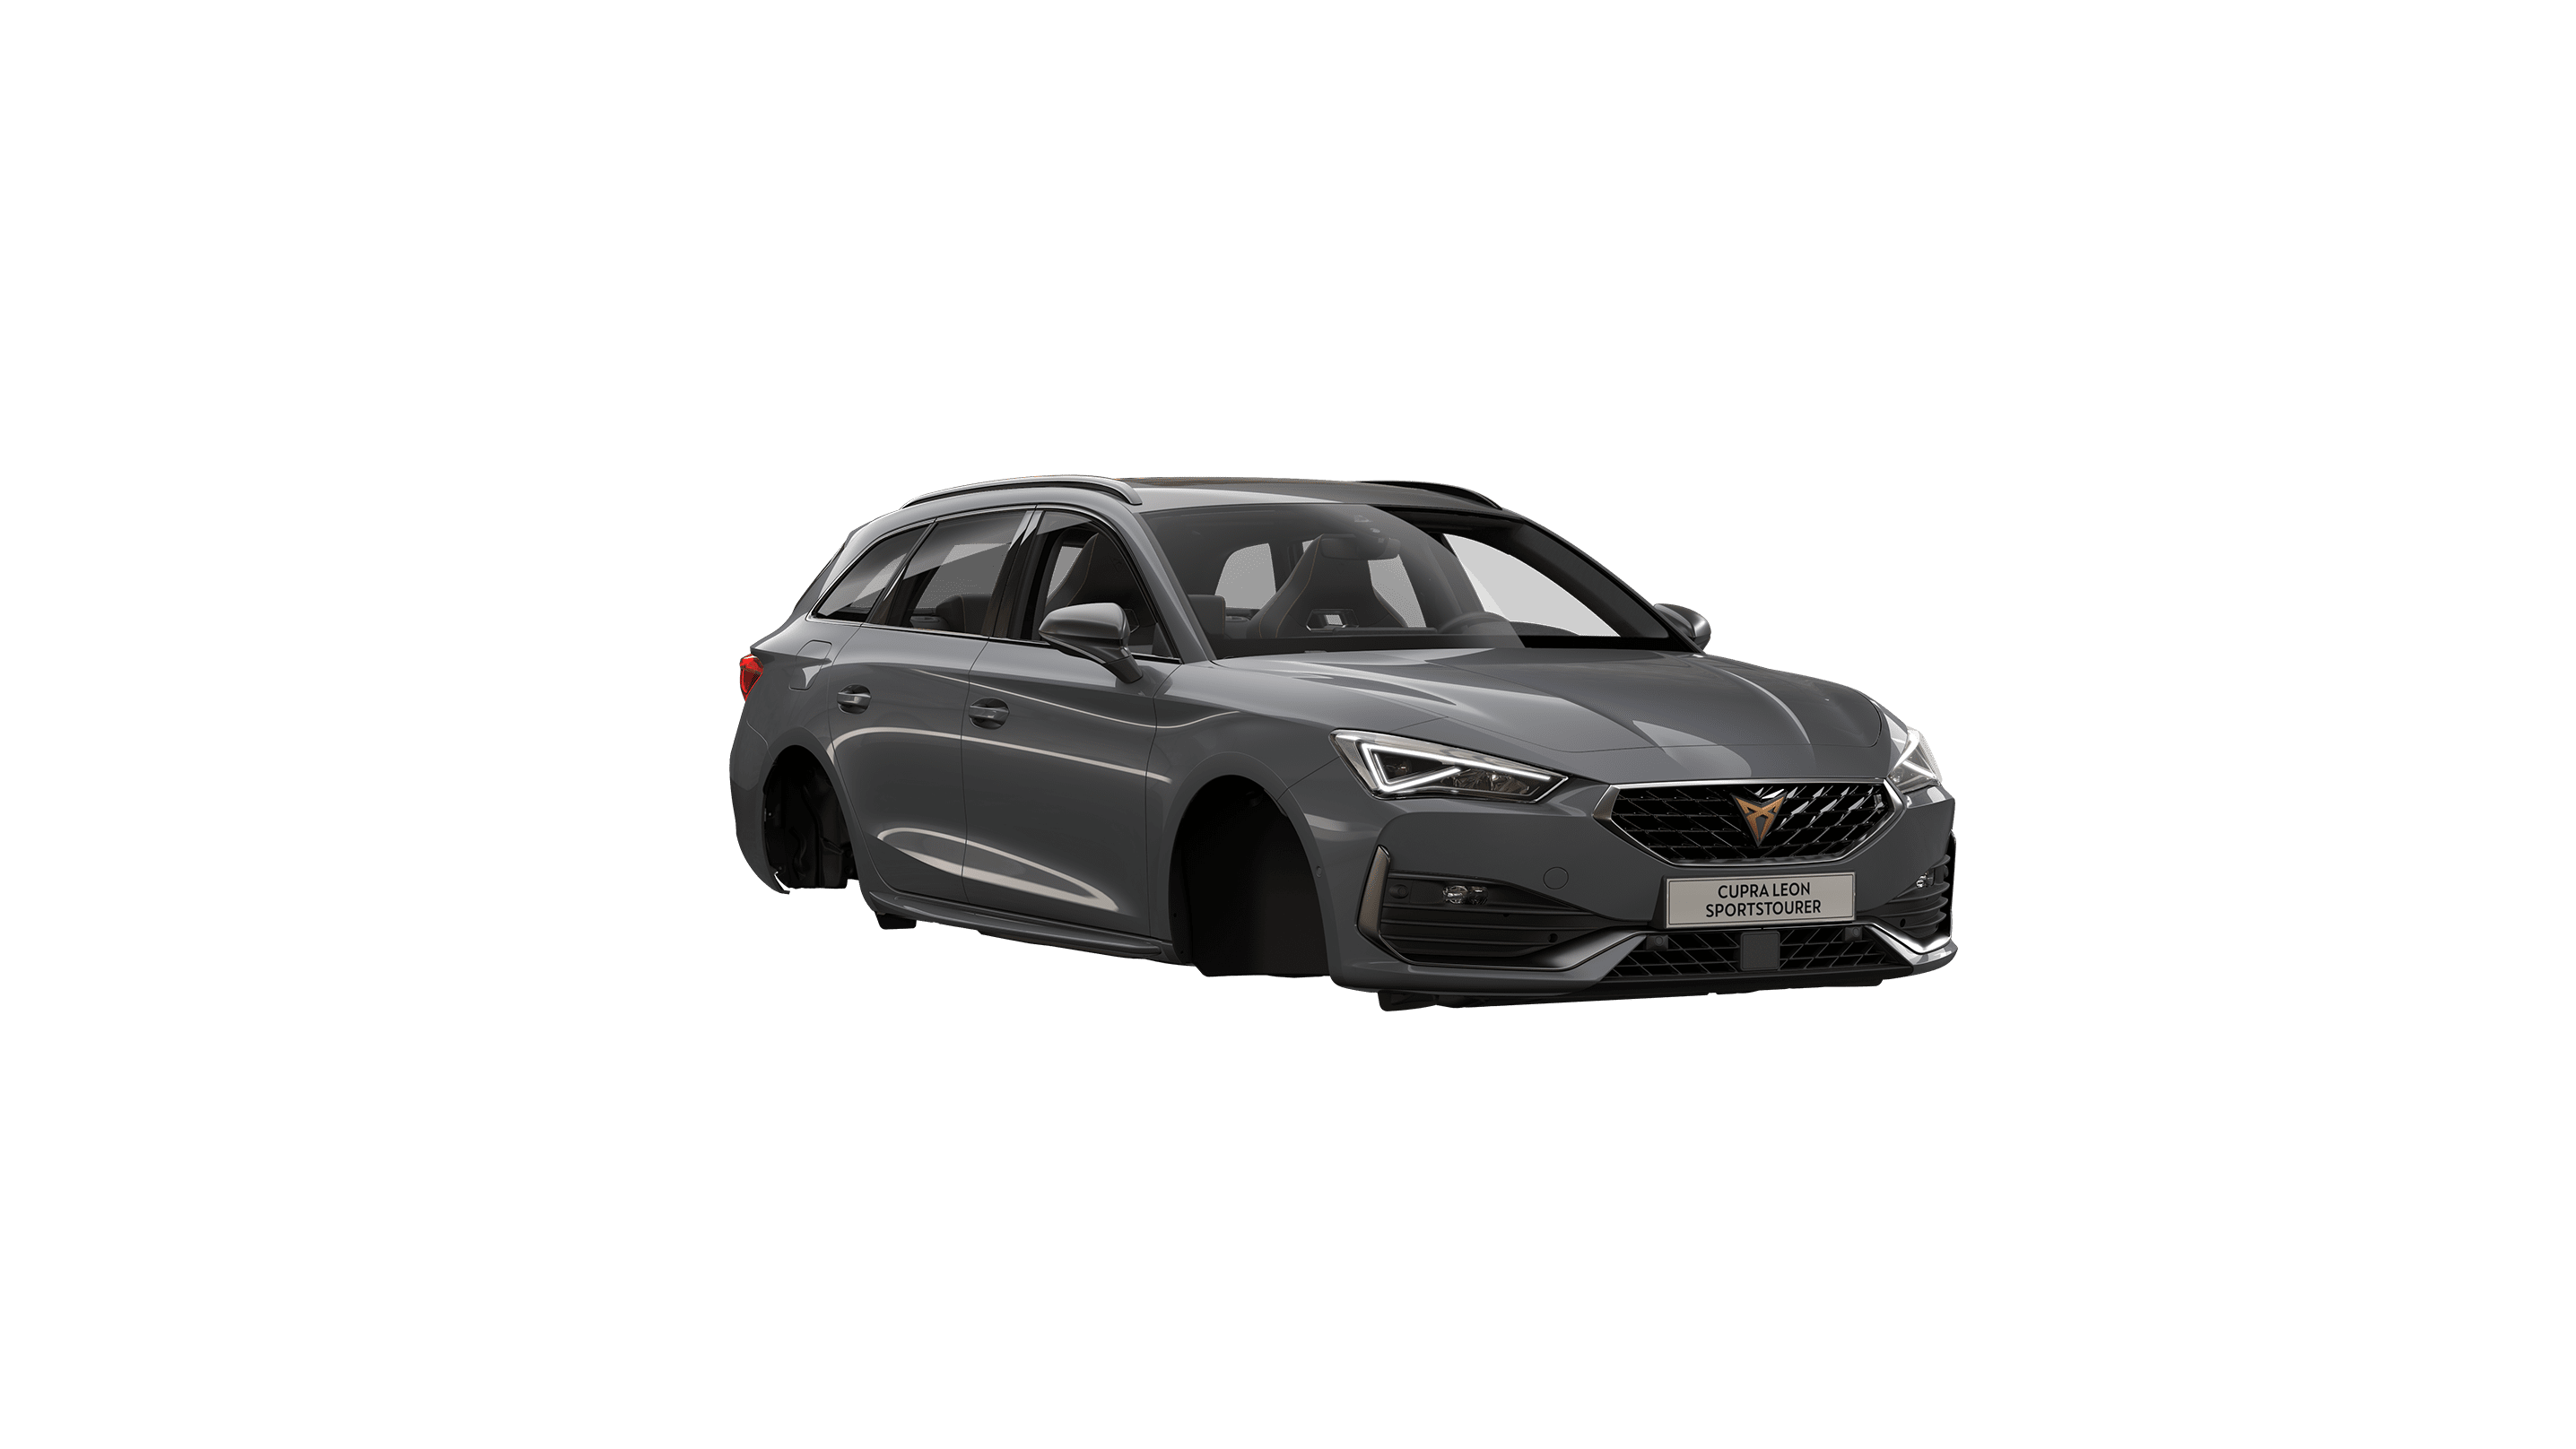 new cupra formentor .available in petrol blue matte colour